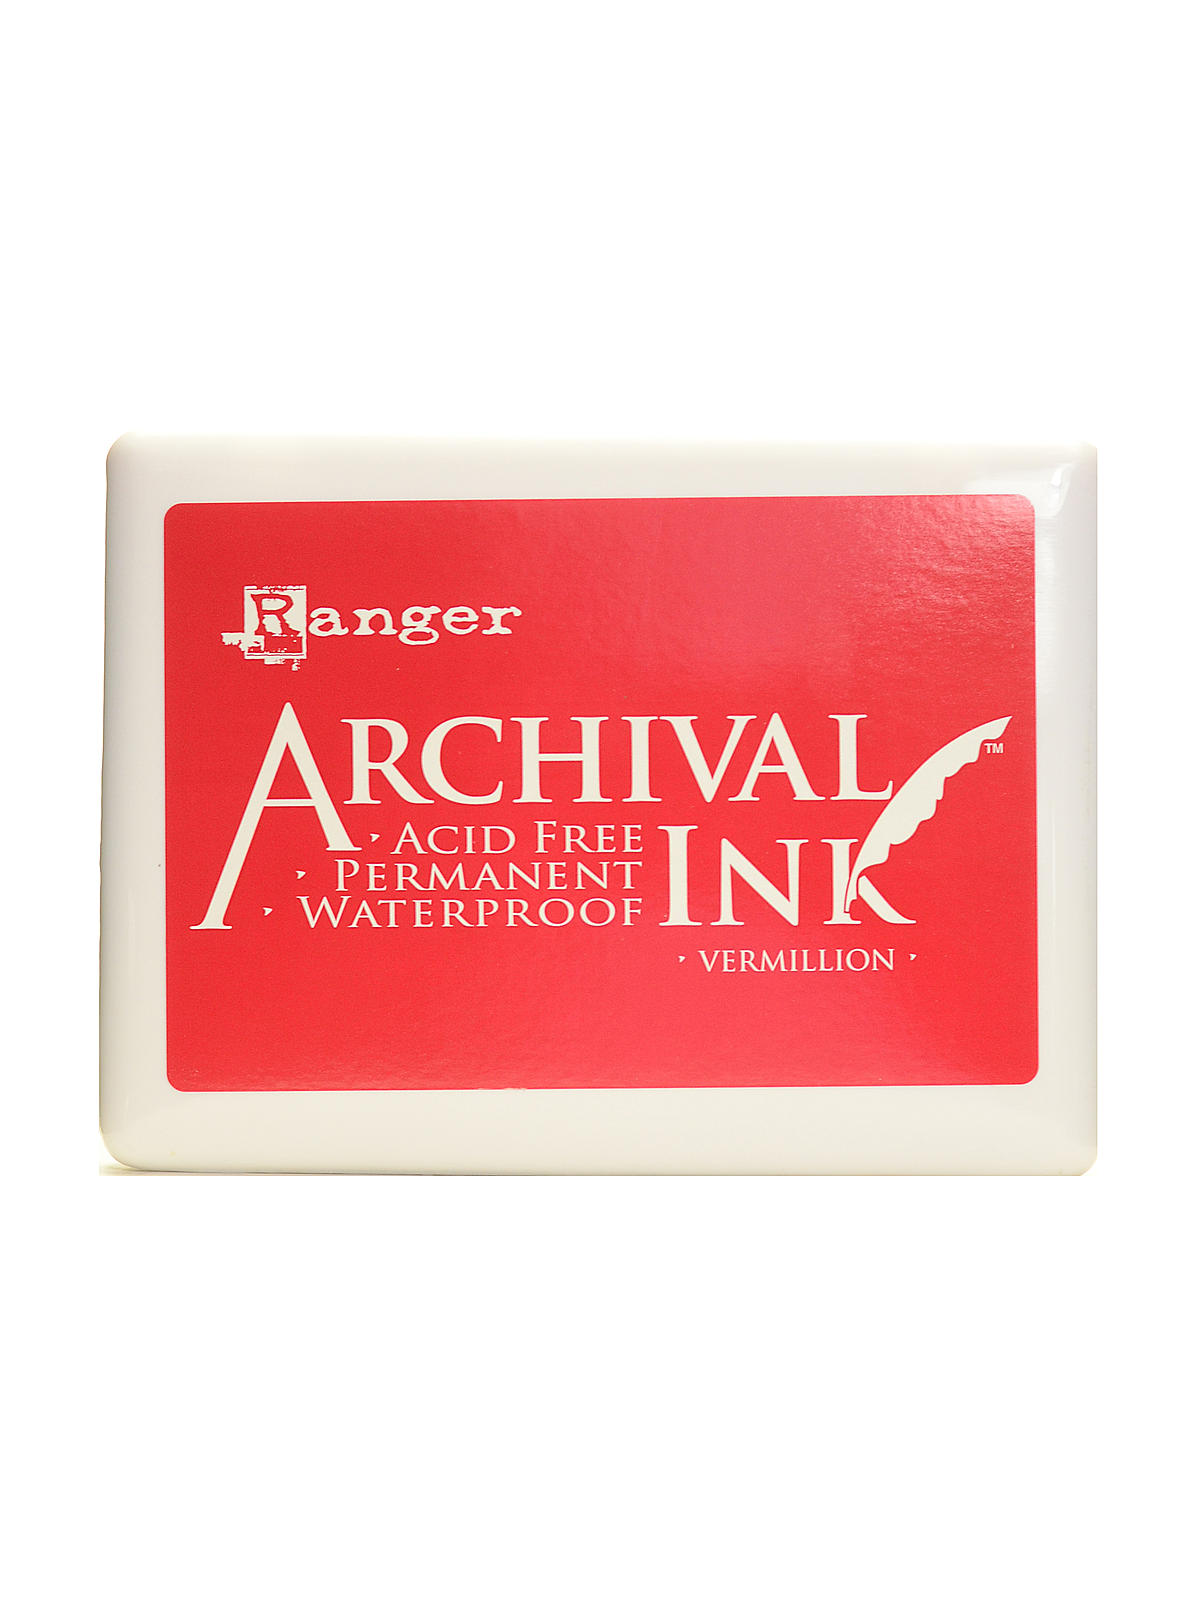 Archival Ink Vermillion 5 In. X 6 1 2 In. Pad